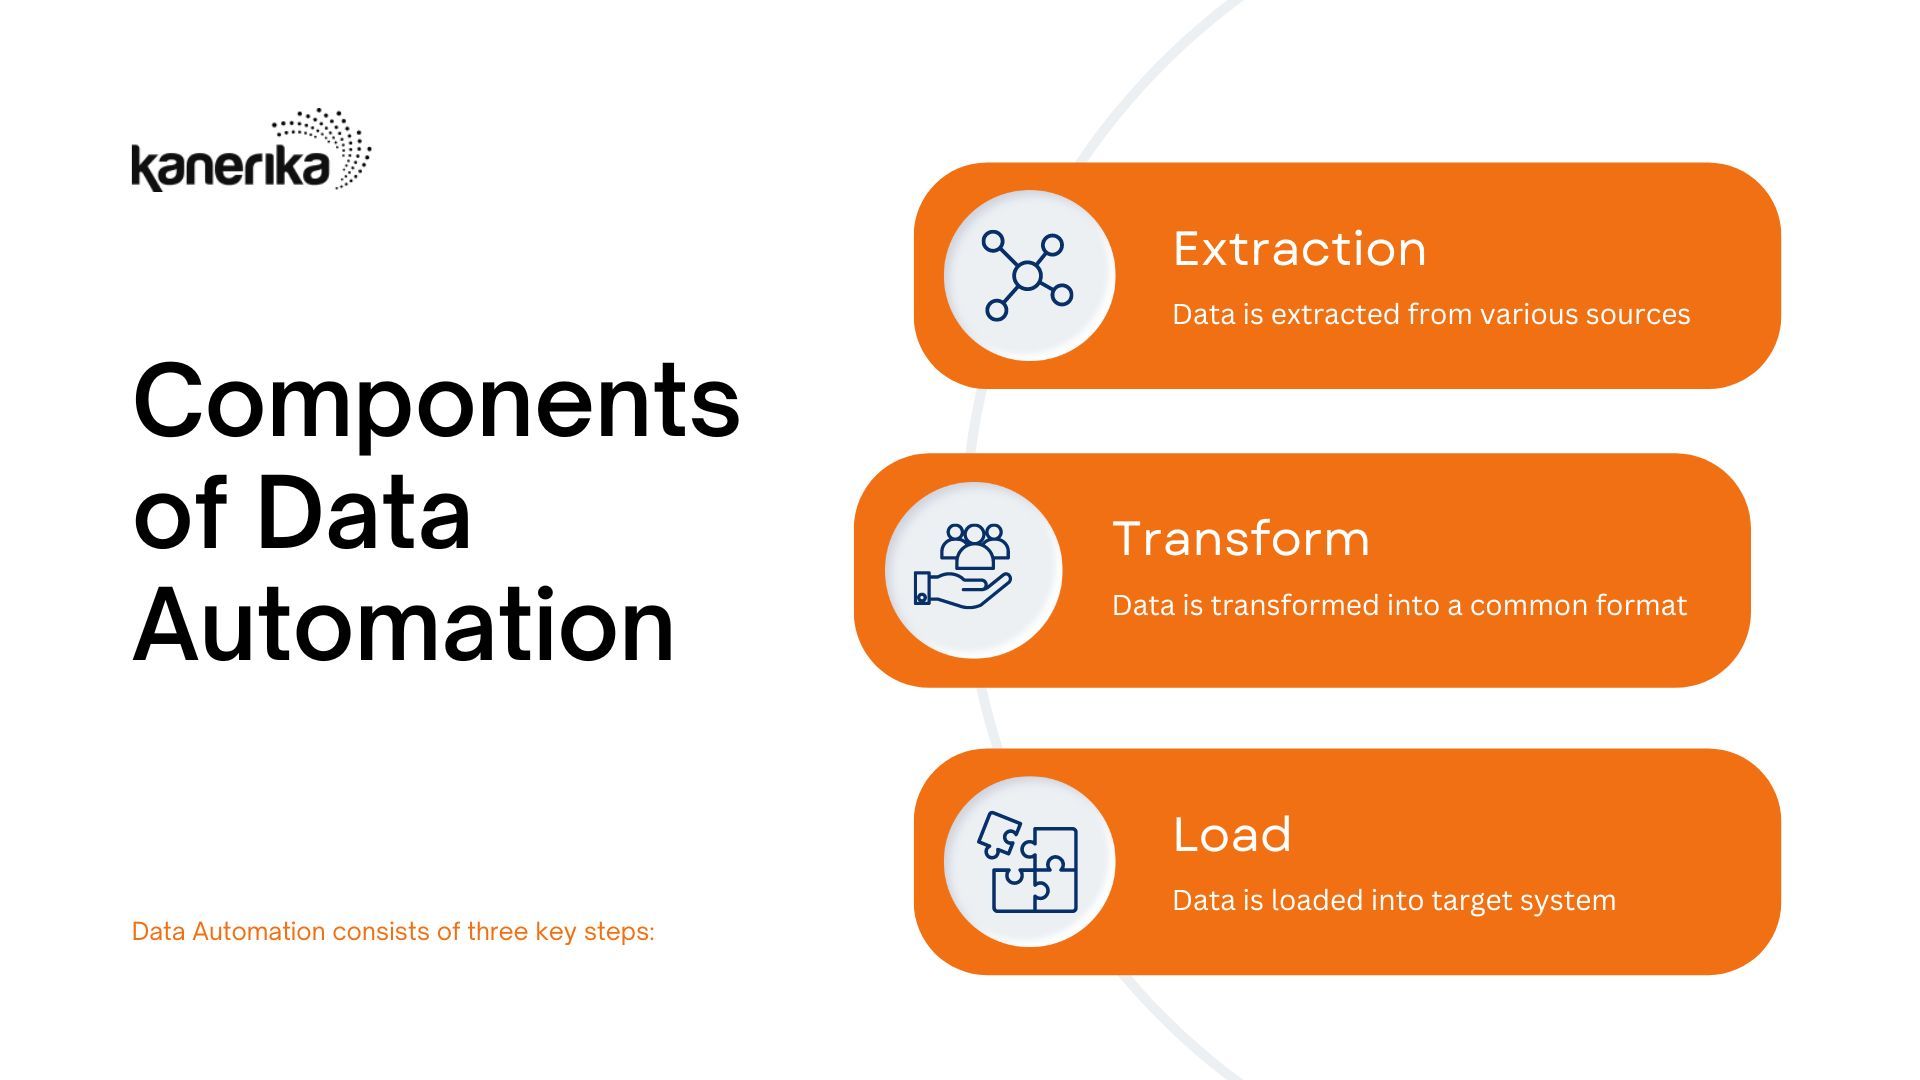 Data Automation involves three essential components: Extract, Transform, and Load, or ETL for short.